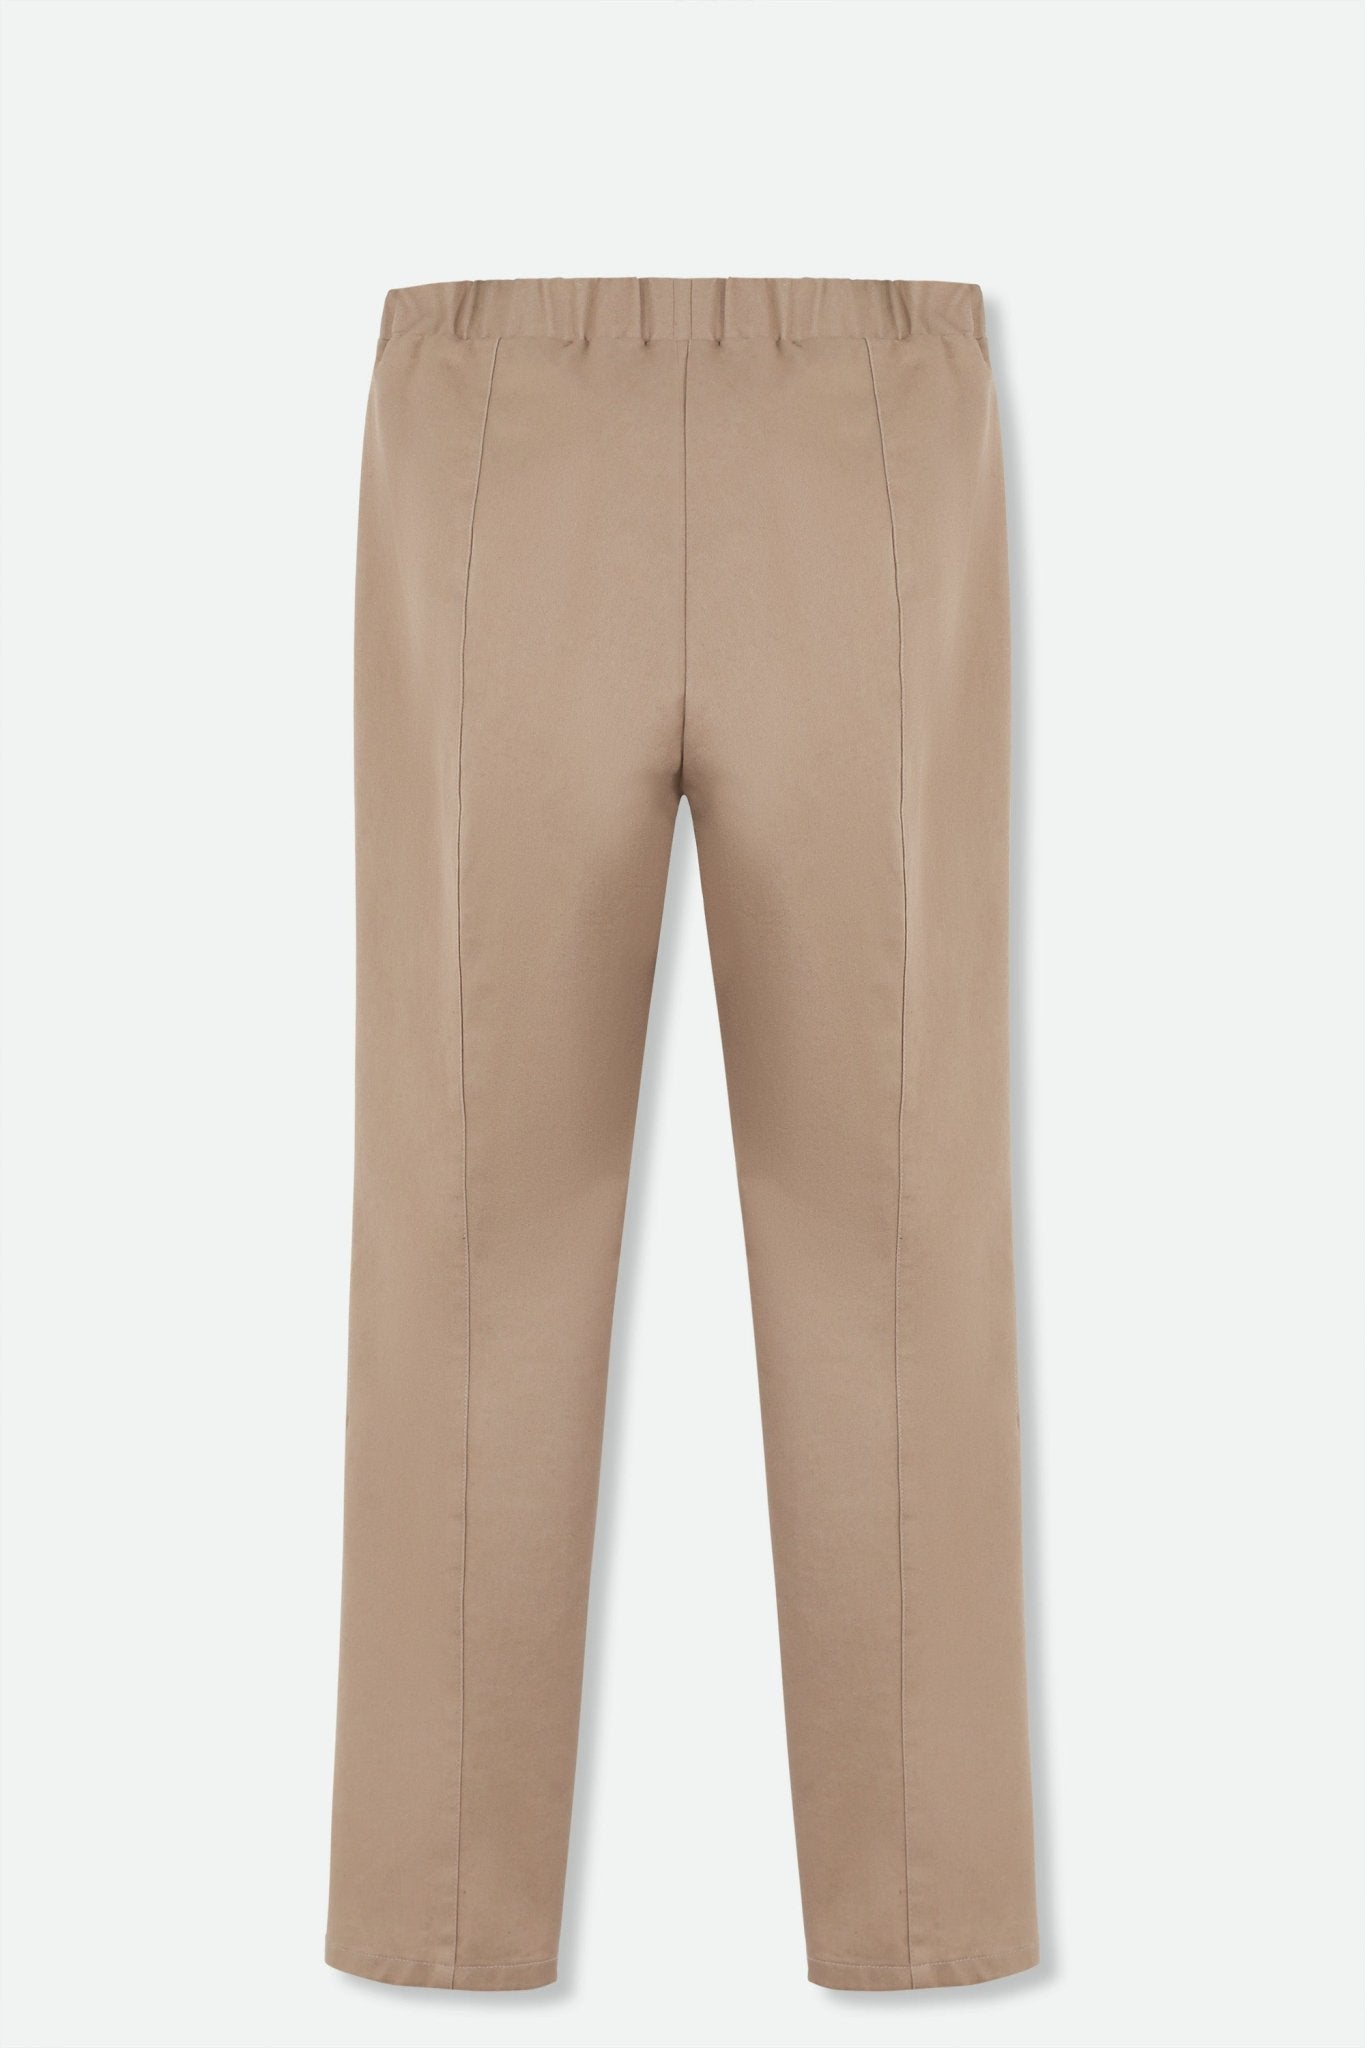 PERRYN PANT IN TECHNICAL COTTON STRETCH IN CACAO SAHARA - Jarbo